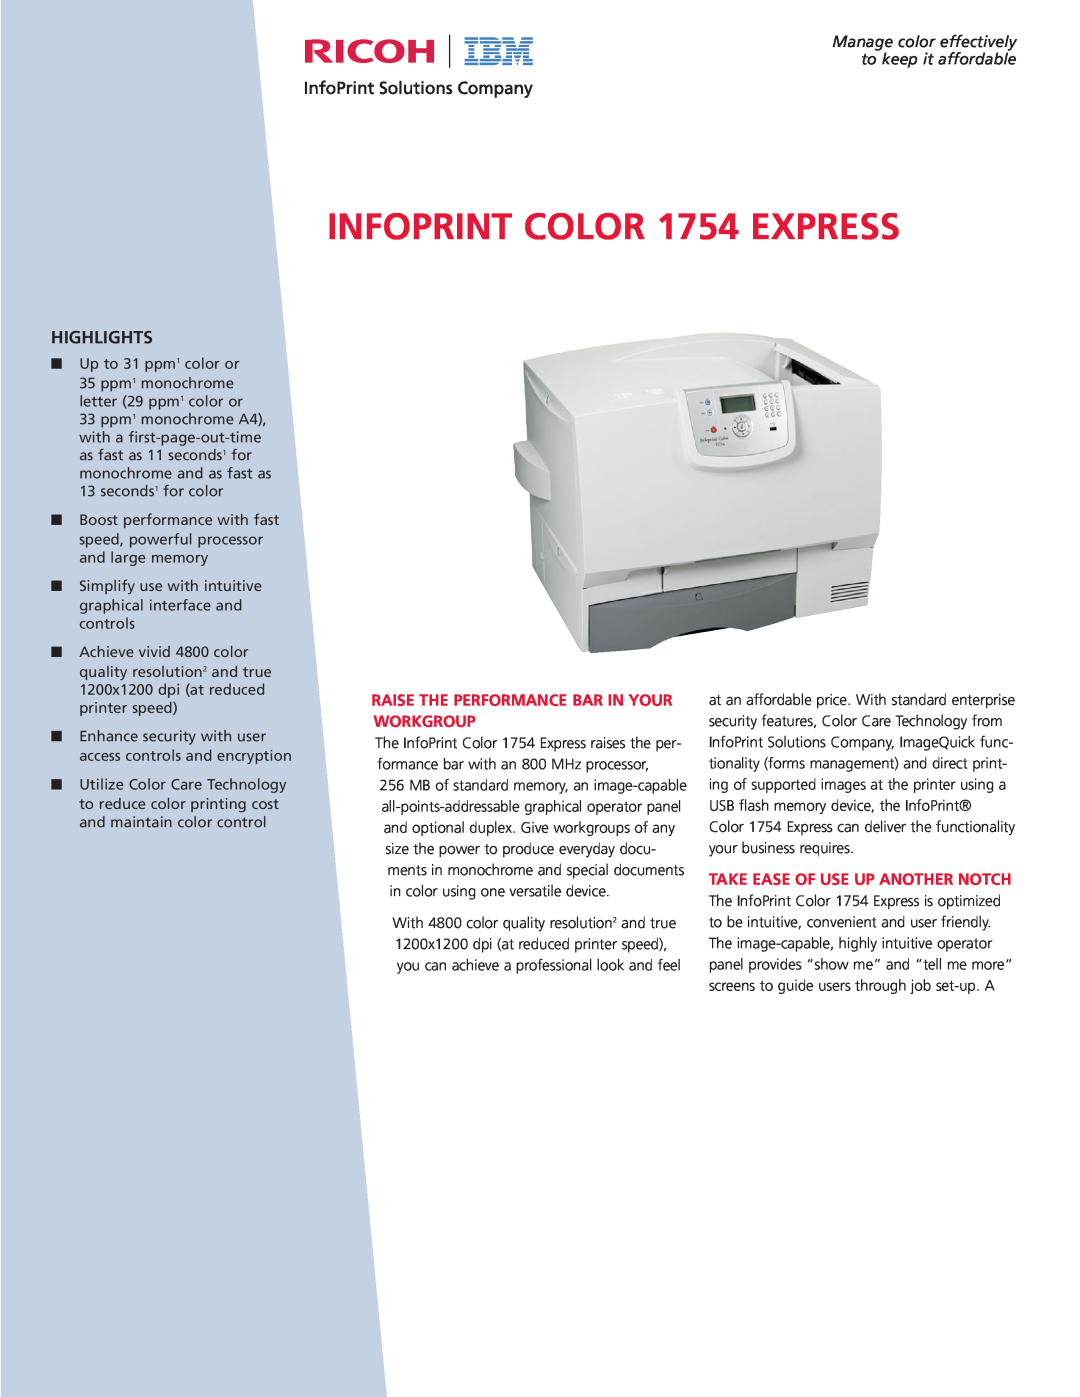 Ricoh 1754 manual Raise The Performance Bar In Your Workgroup, Take Ease Of Use Up Another Notch, Highlights 